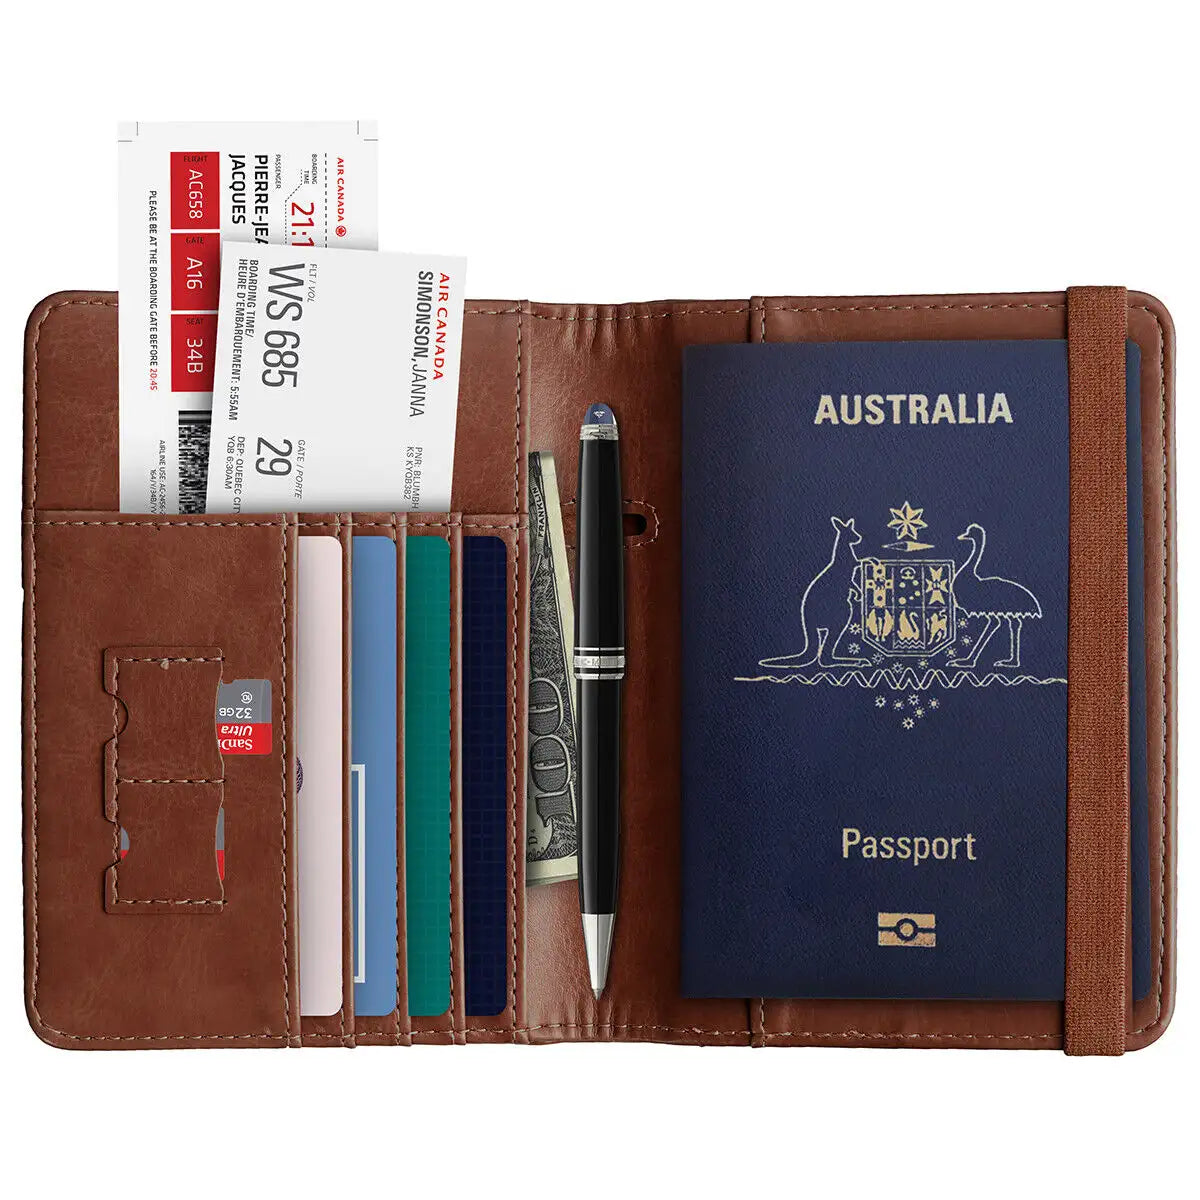 Brown RFID travel wallet with boarding pass, cash, credit cards, pen, sim cards & passport